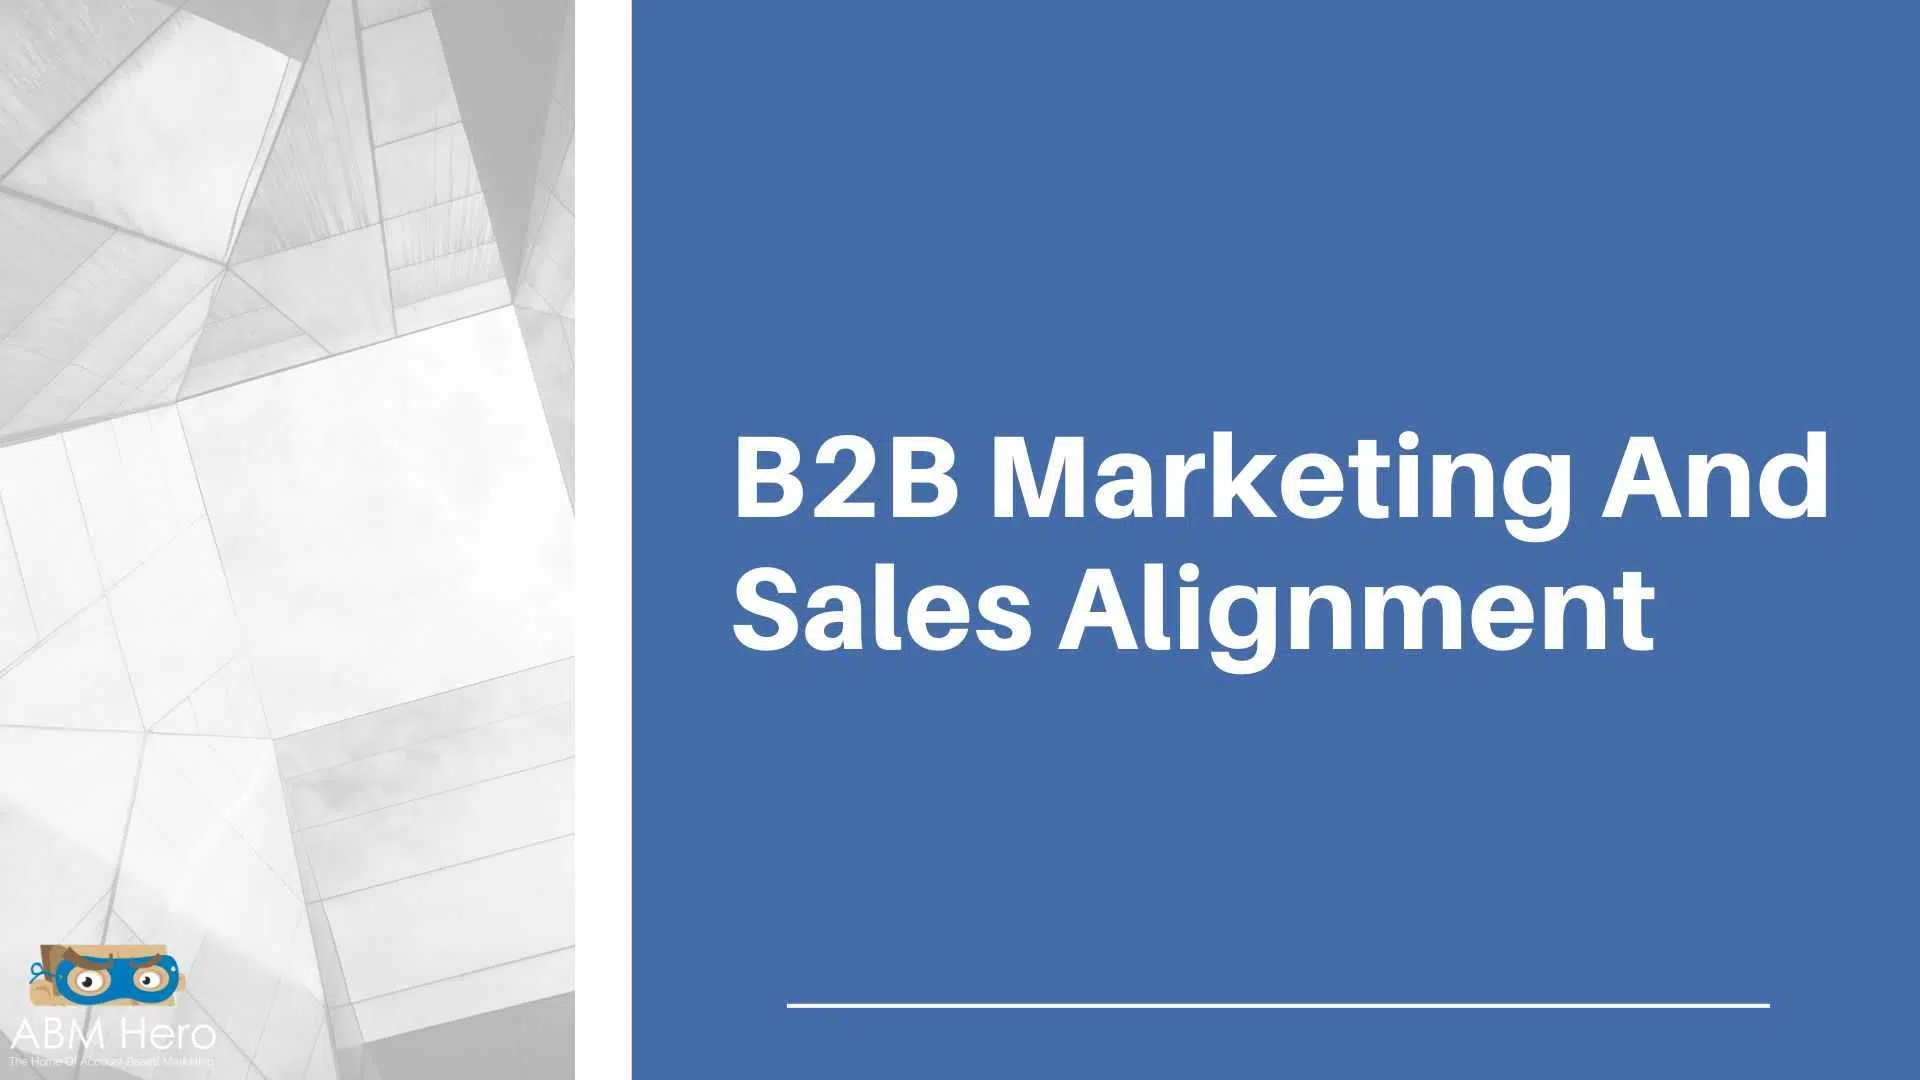 You are currently viewing B2B Marketing And Sales Alignment